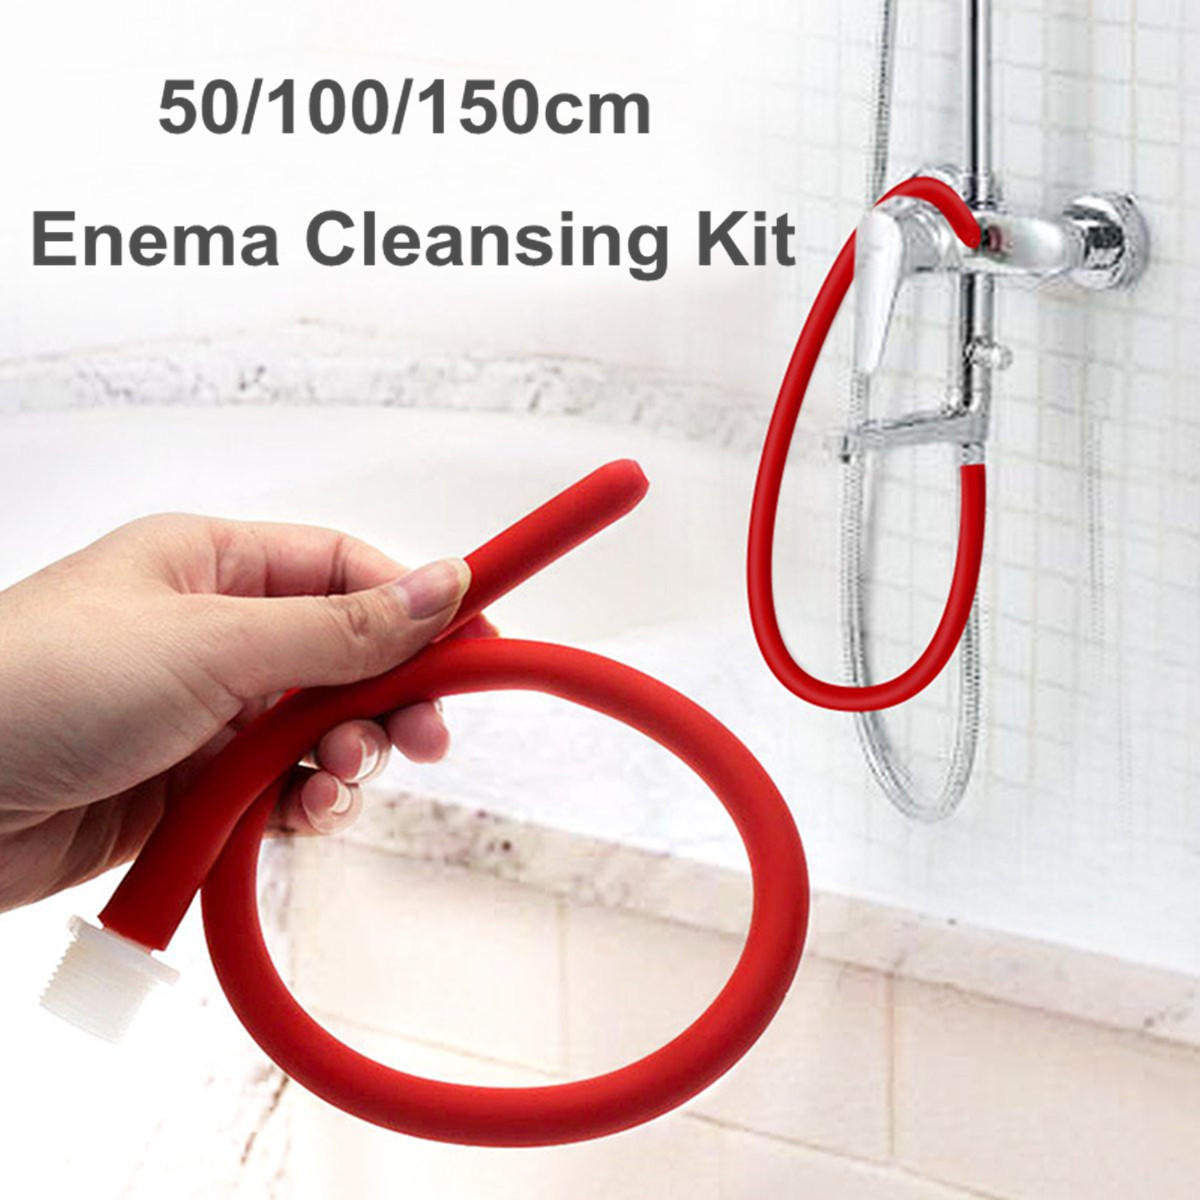 50/100/150cm Long Enema Tube Cleaner Douche Soft Silicone Latex Nozzle Cleaning Silicone Tube